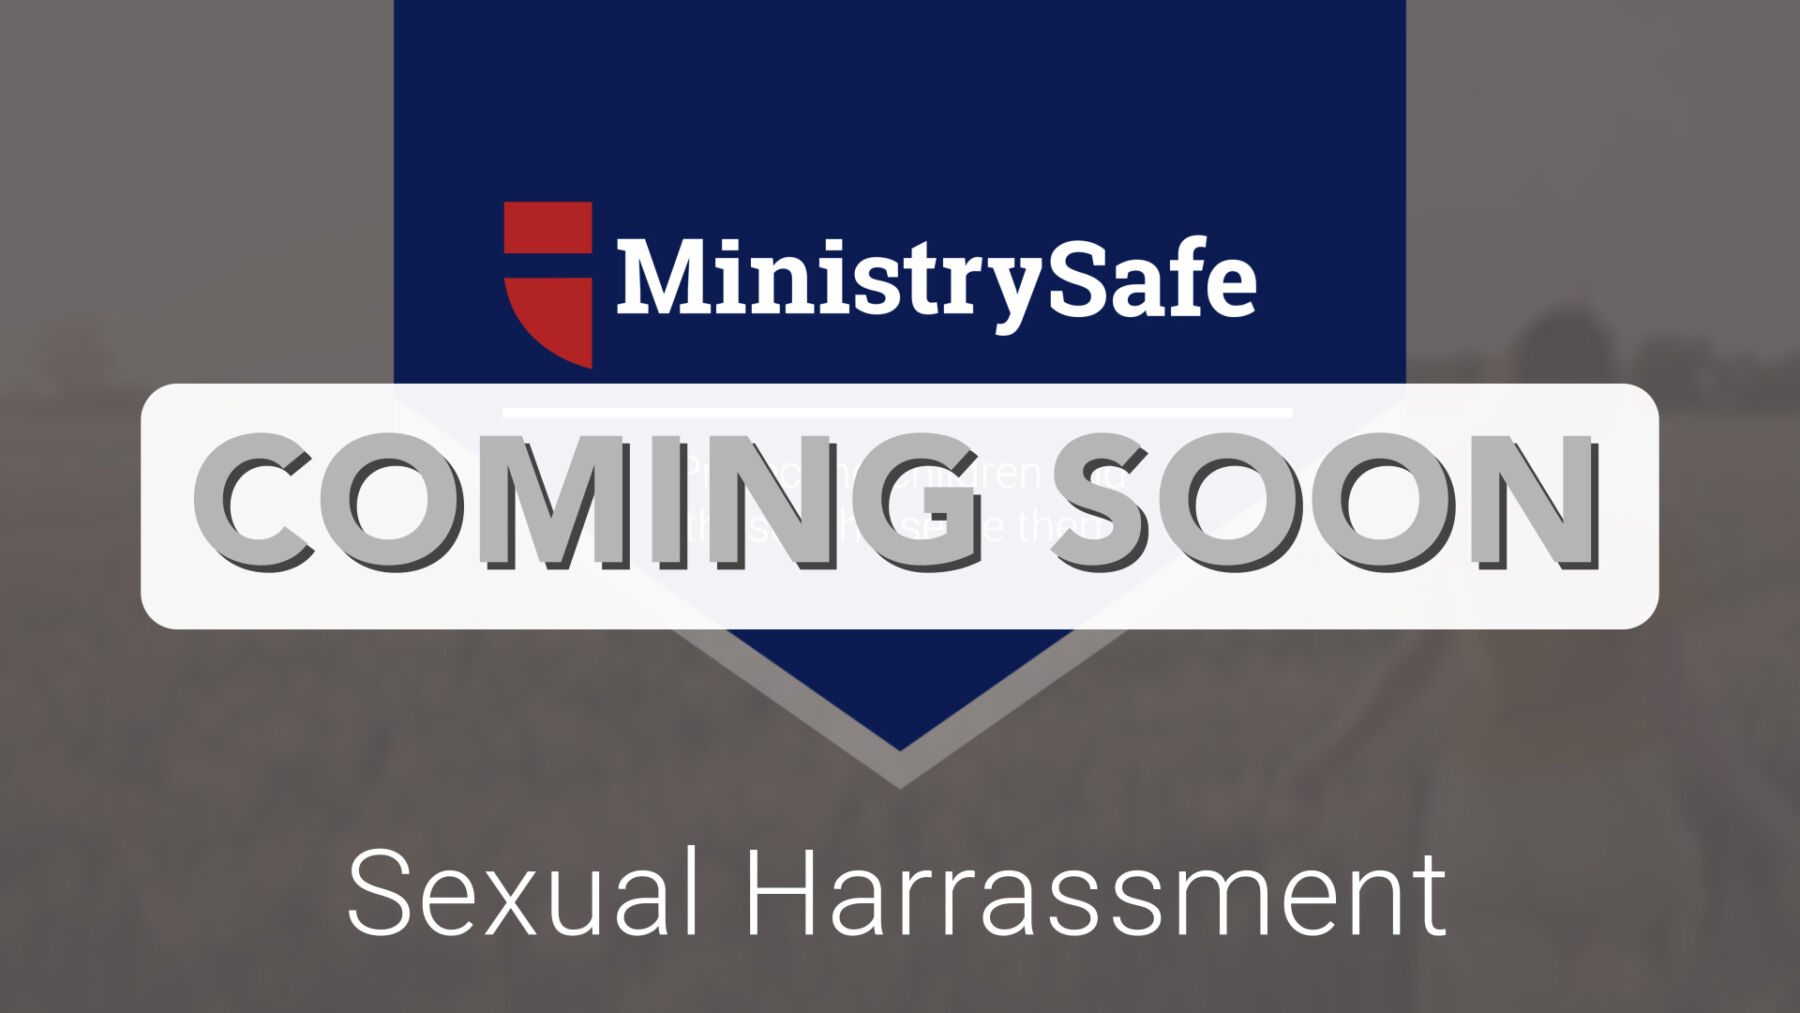 MS - Thumbnail - Sexual Harrassment - Coming Soon